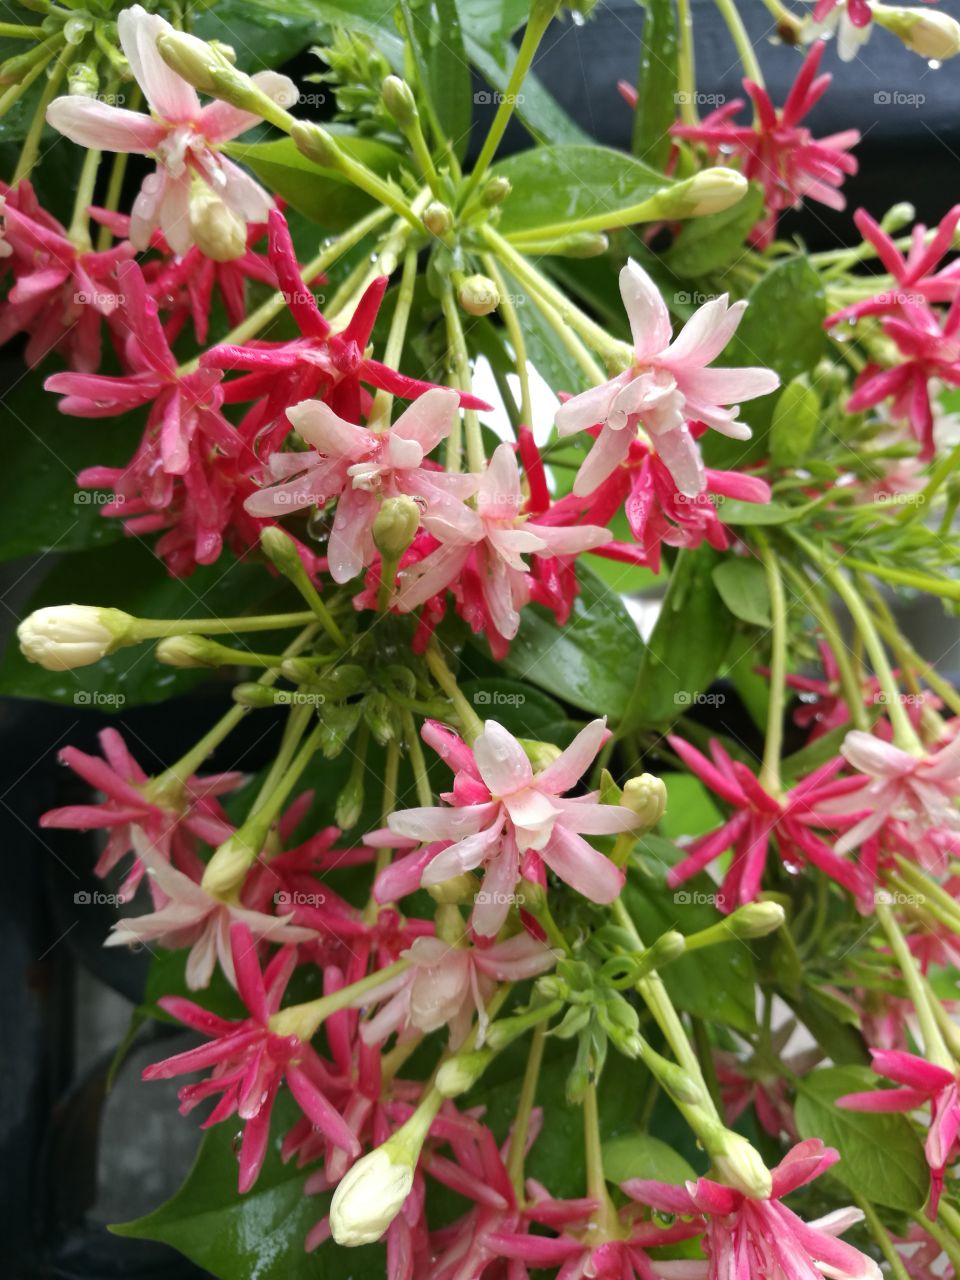 Rangoon creeper, a vine with red flower clusters.